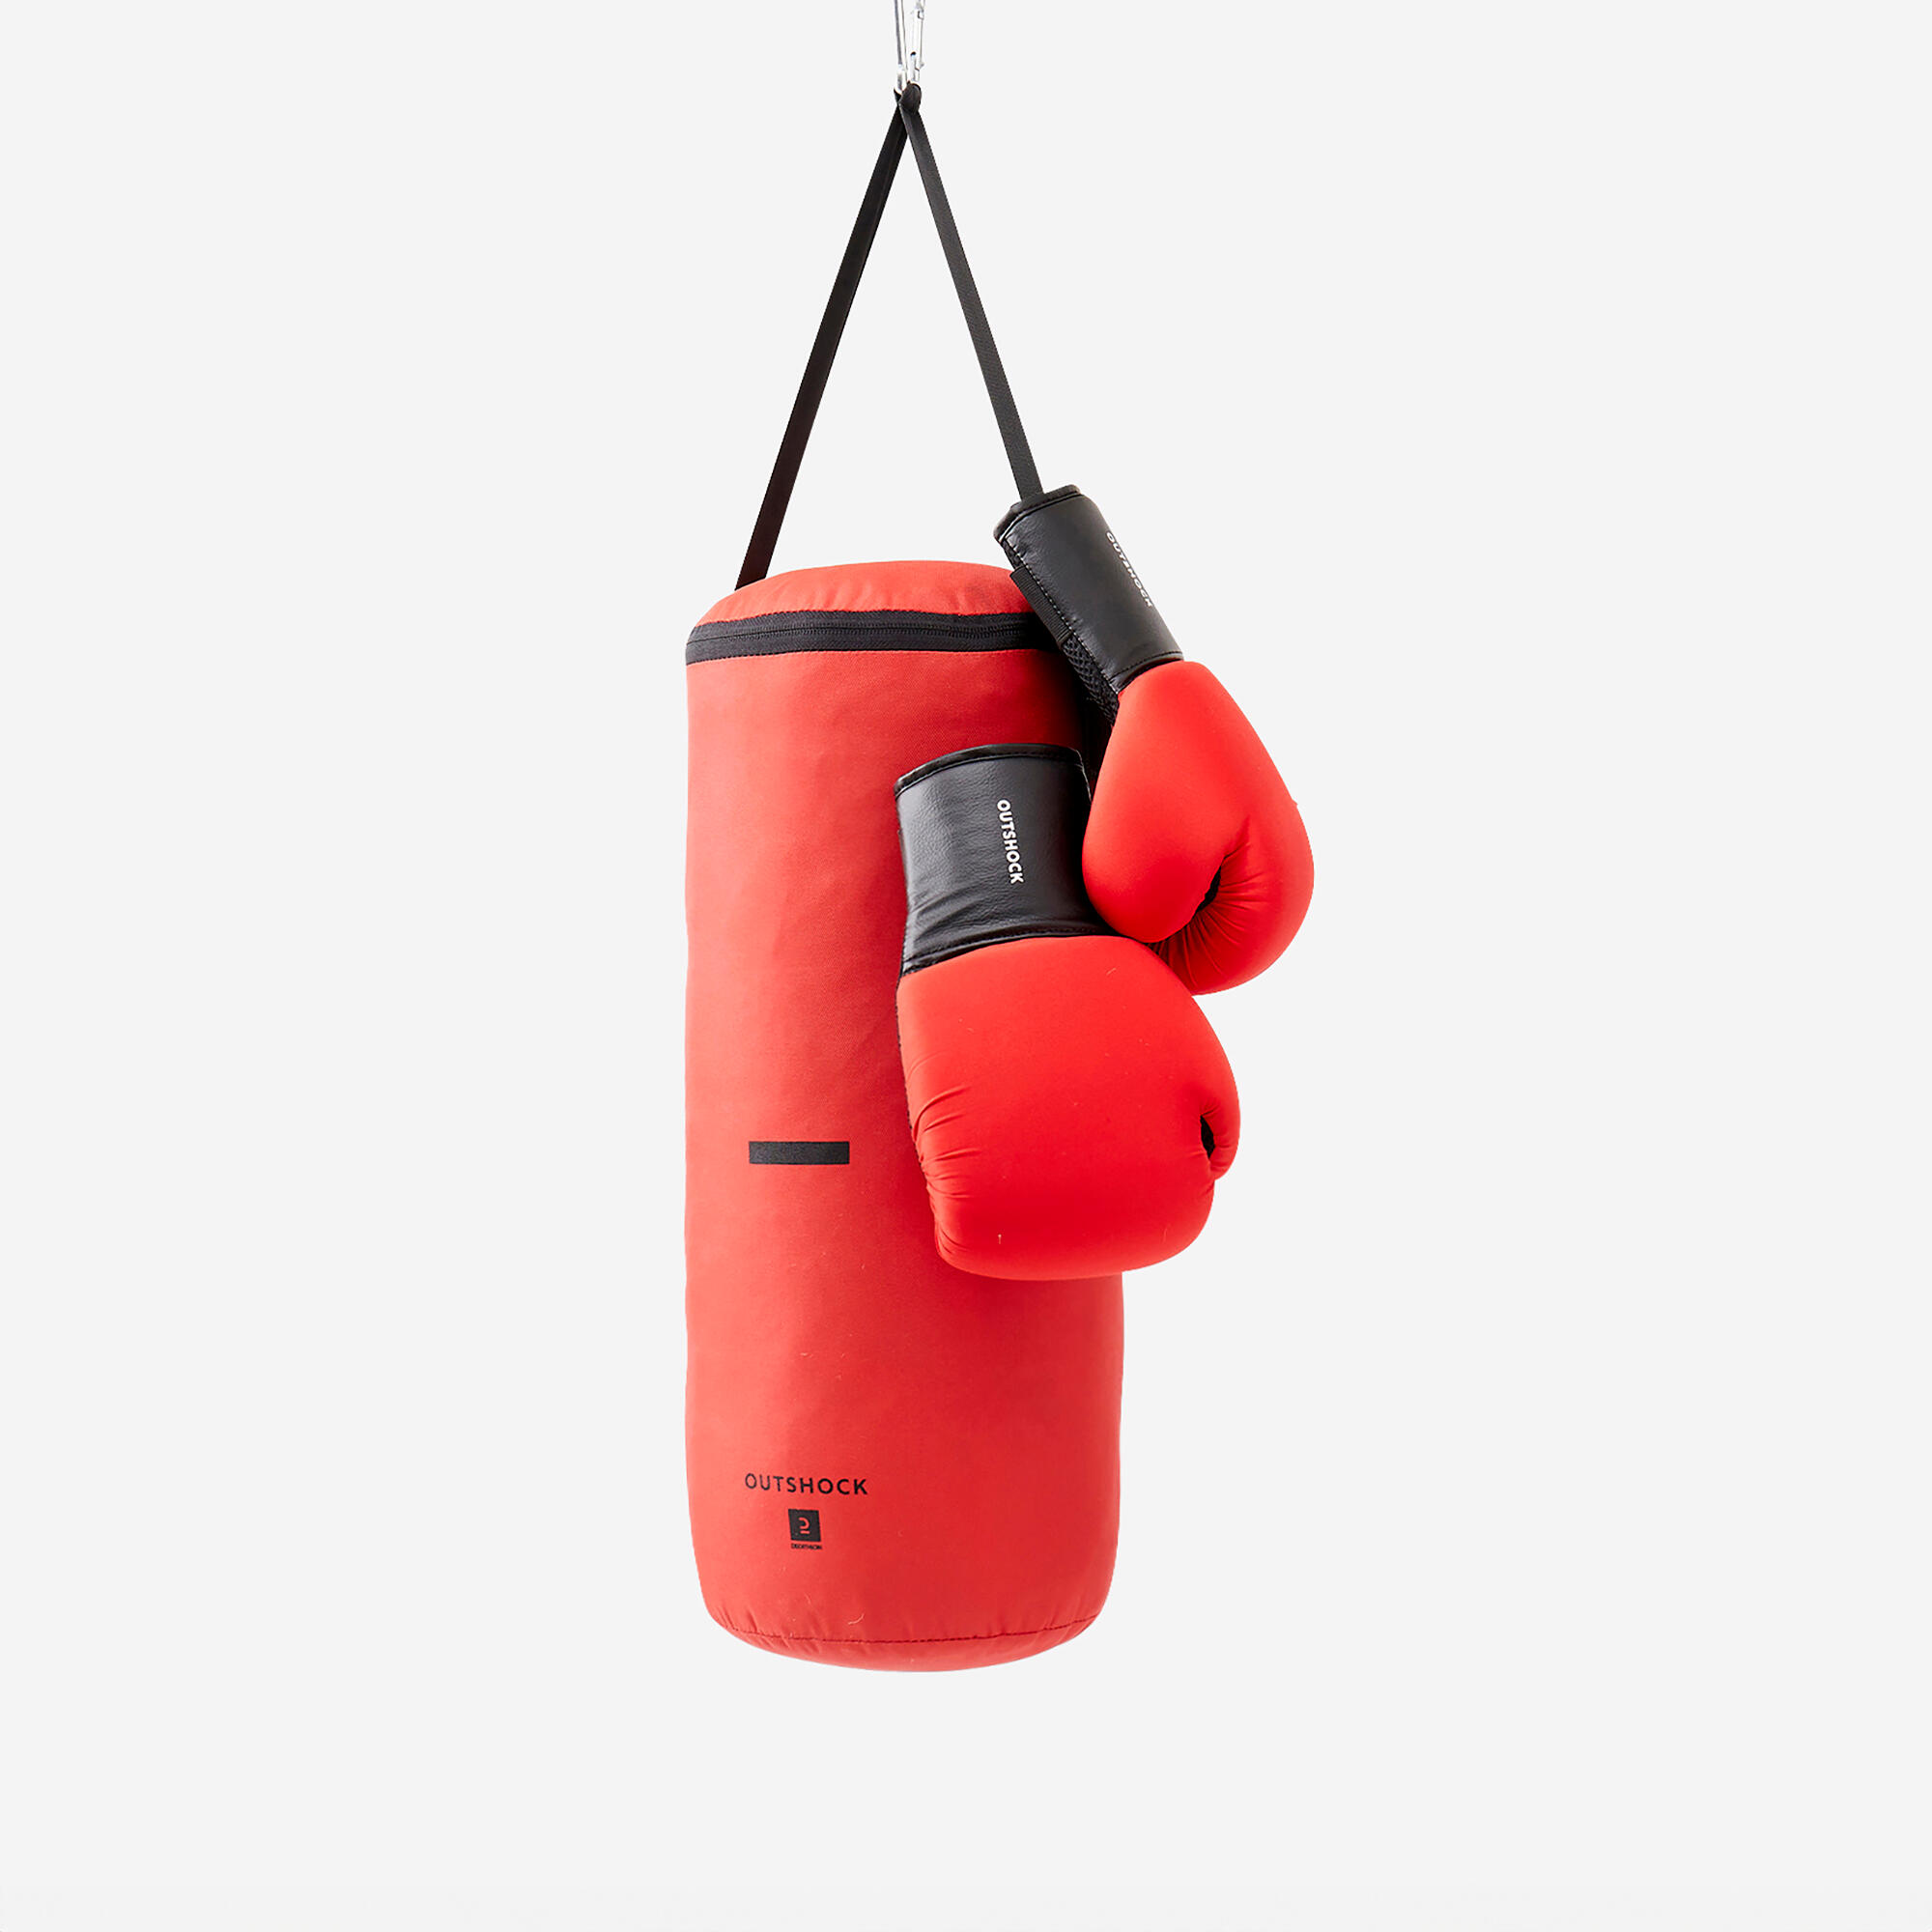 OUTSHOCK Kids' Punching Bag and Boxing Gloves Set - Red